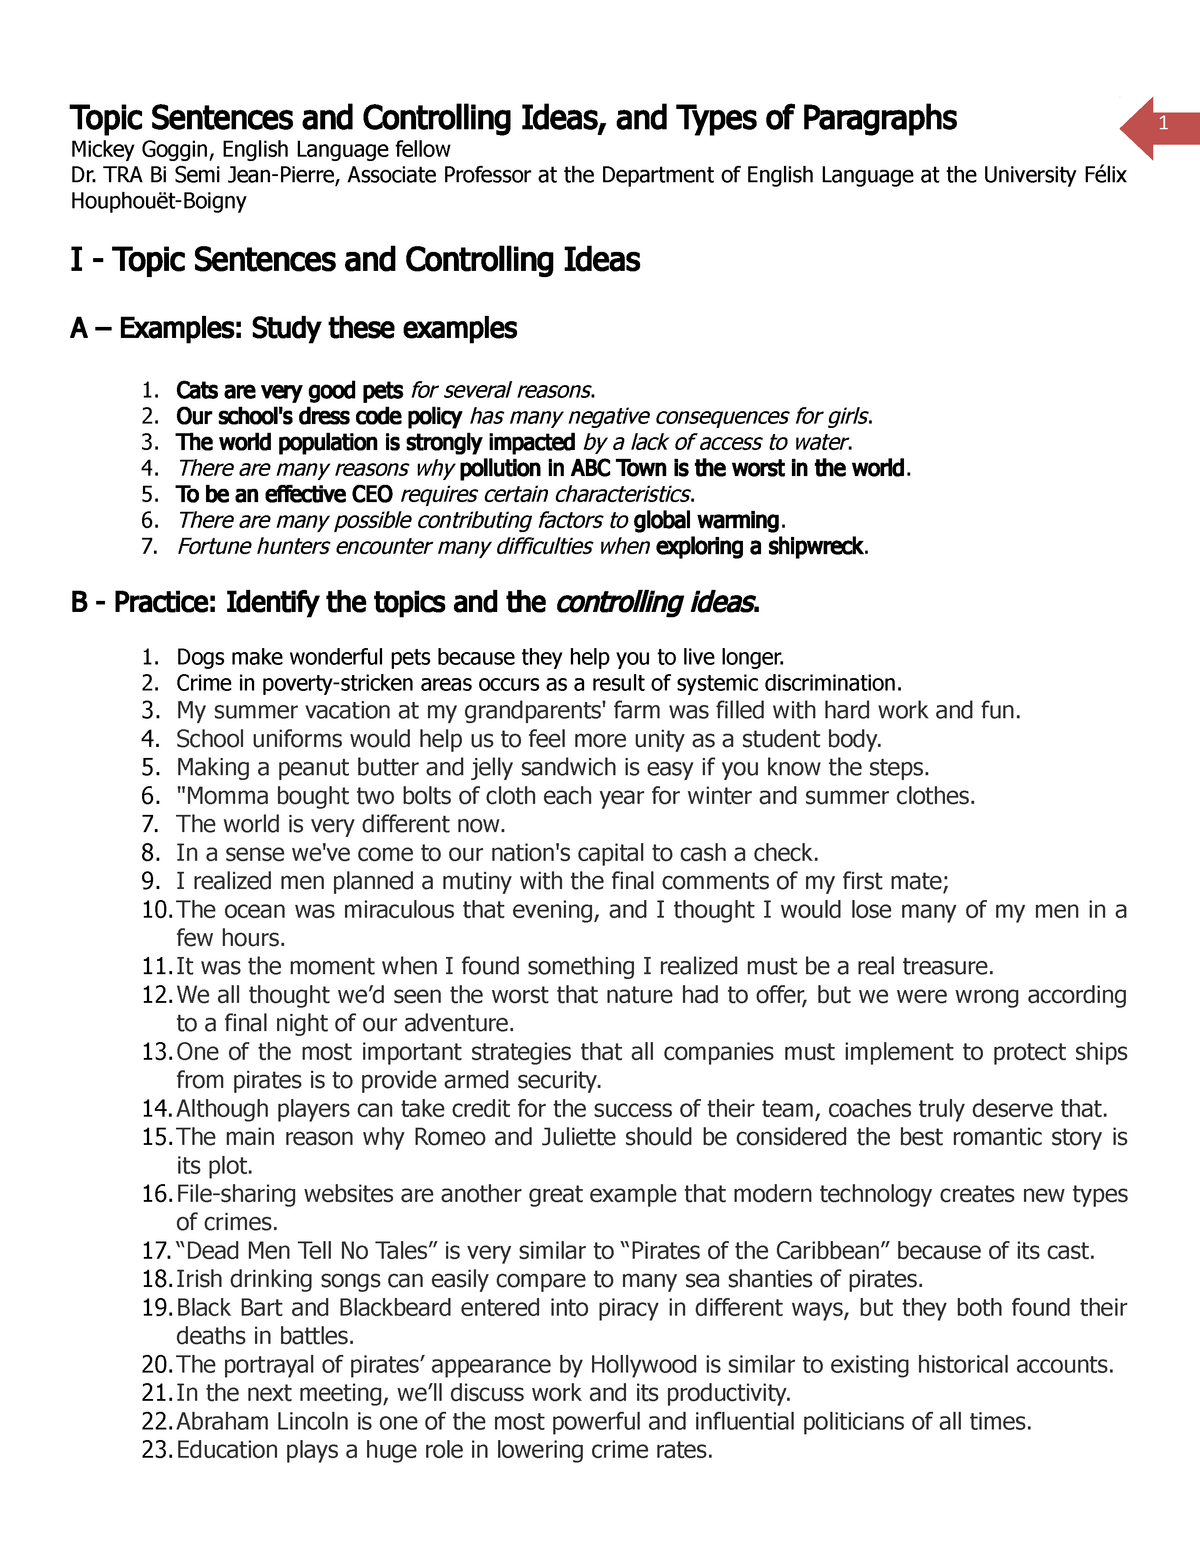 topic-sentences-and-controlling-ideas-types-of-paragraphs-topic-sentences-and-controlling